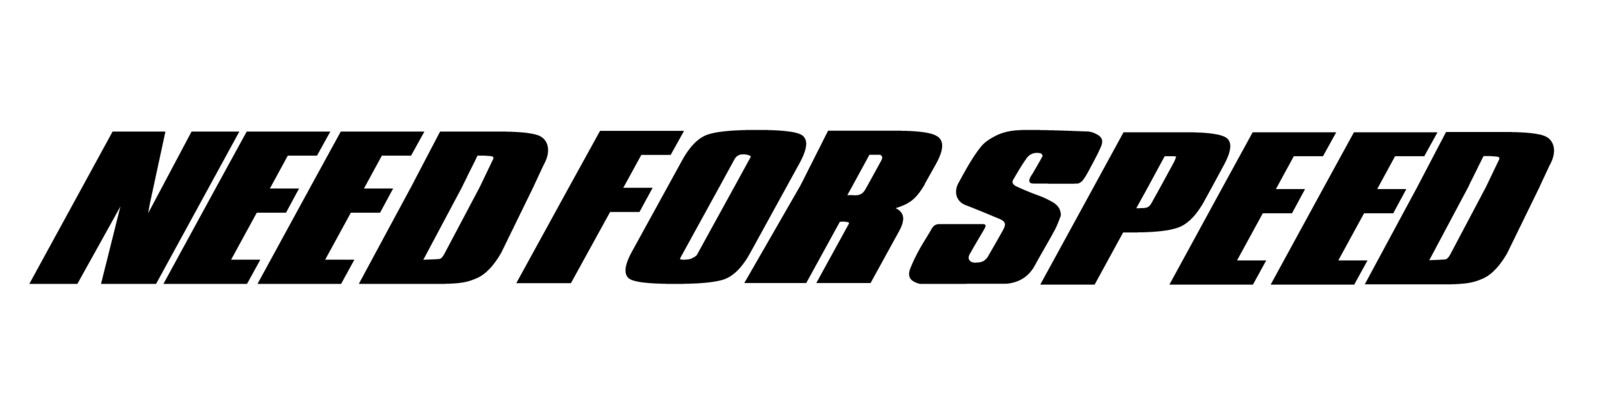 Old Need for Speed logo (1994-2001)